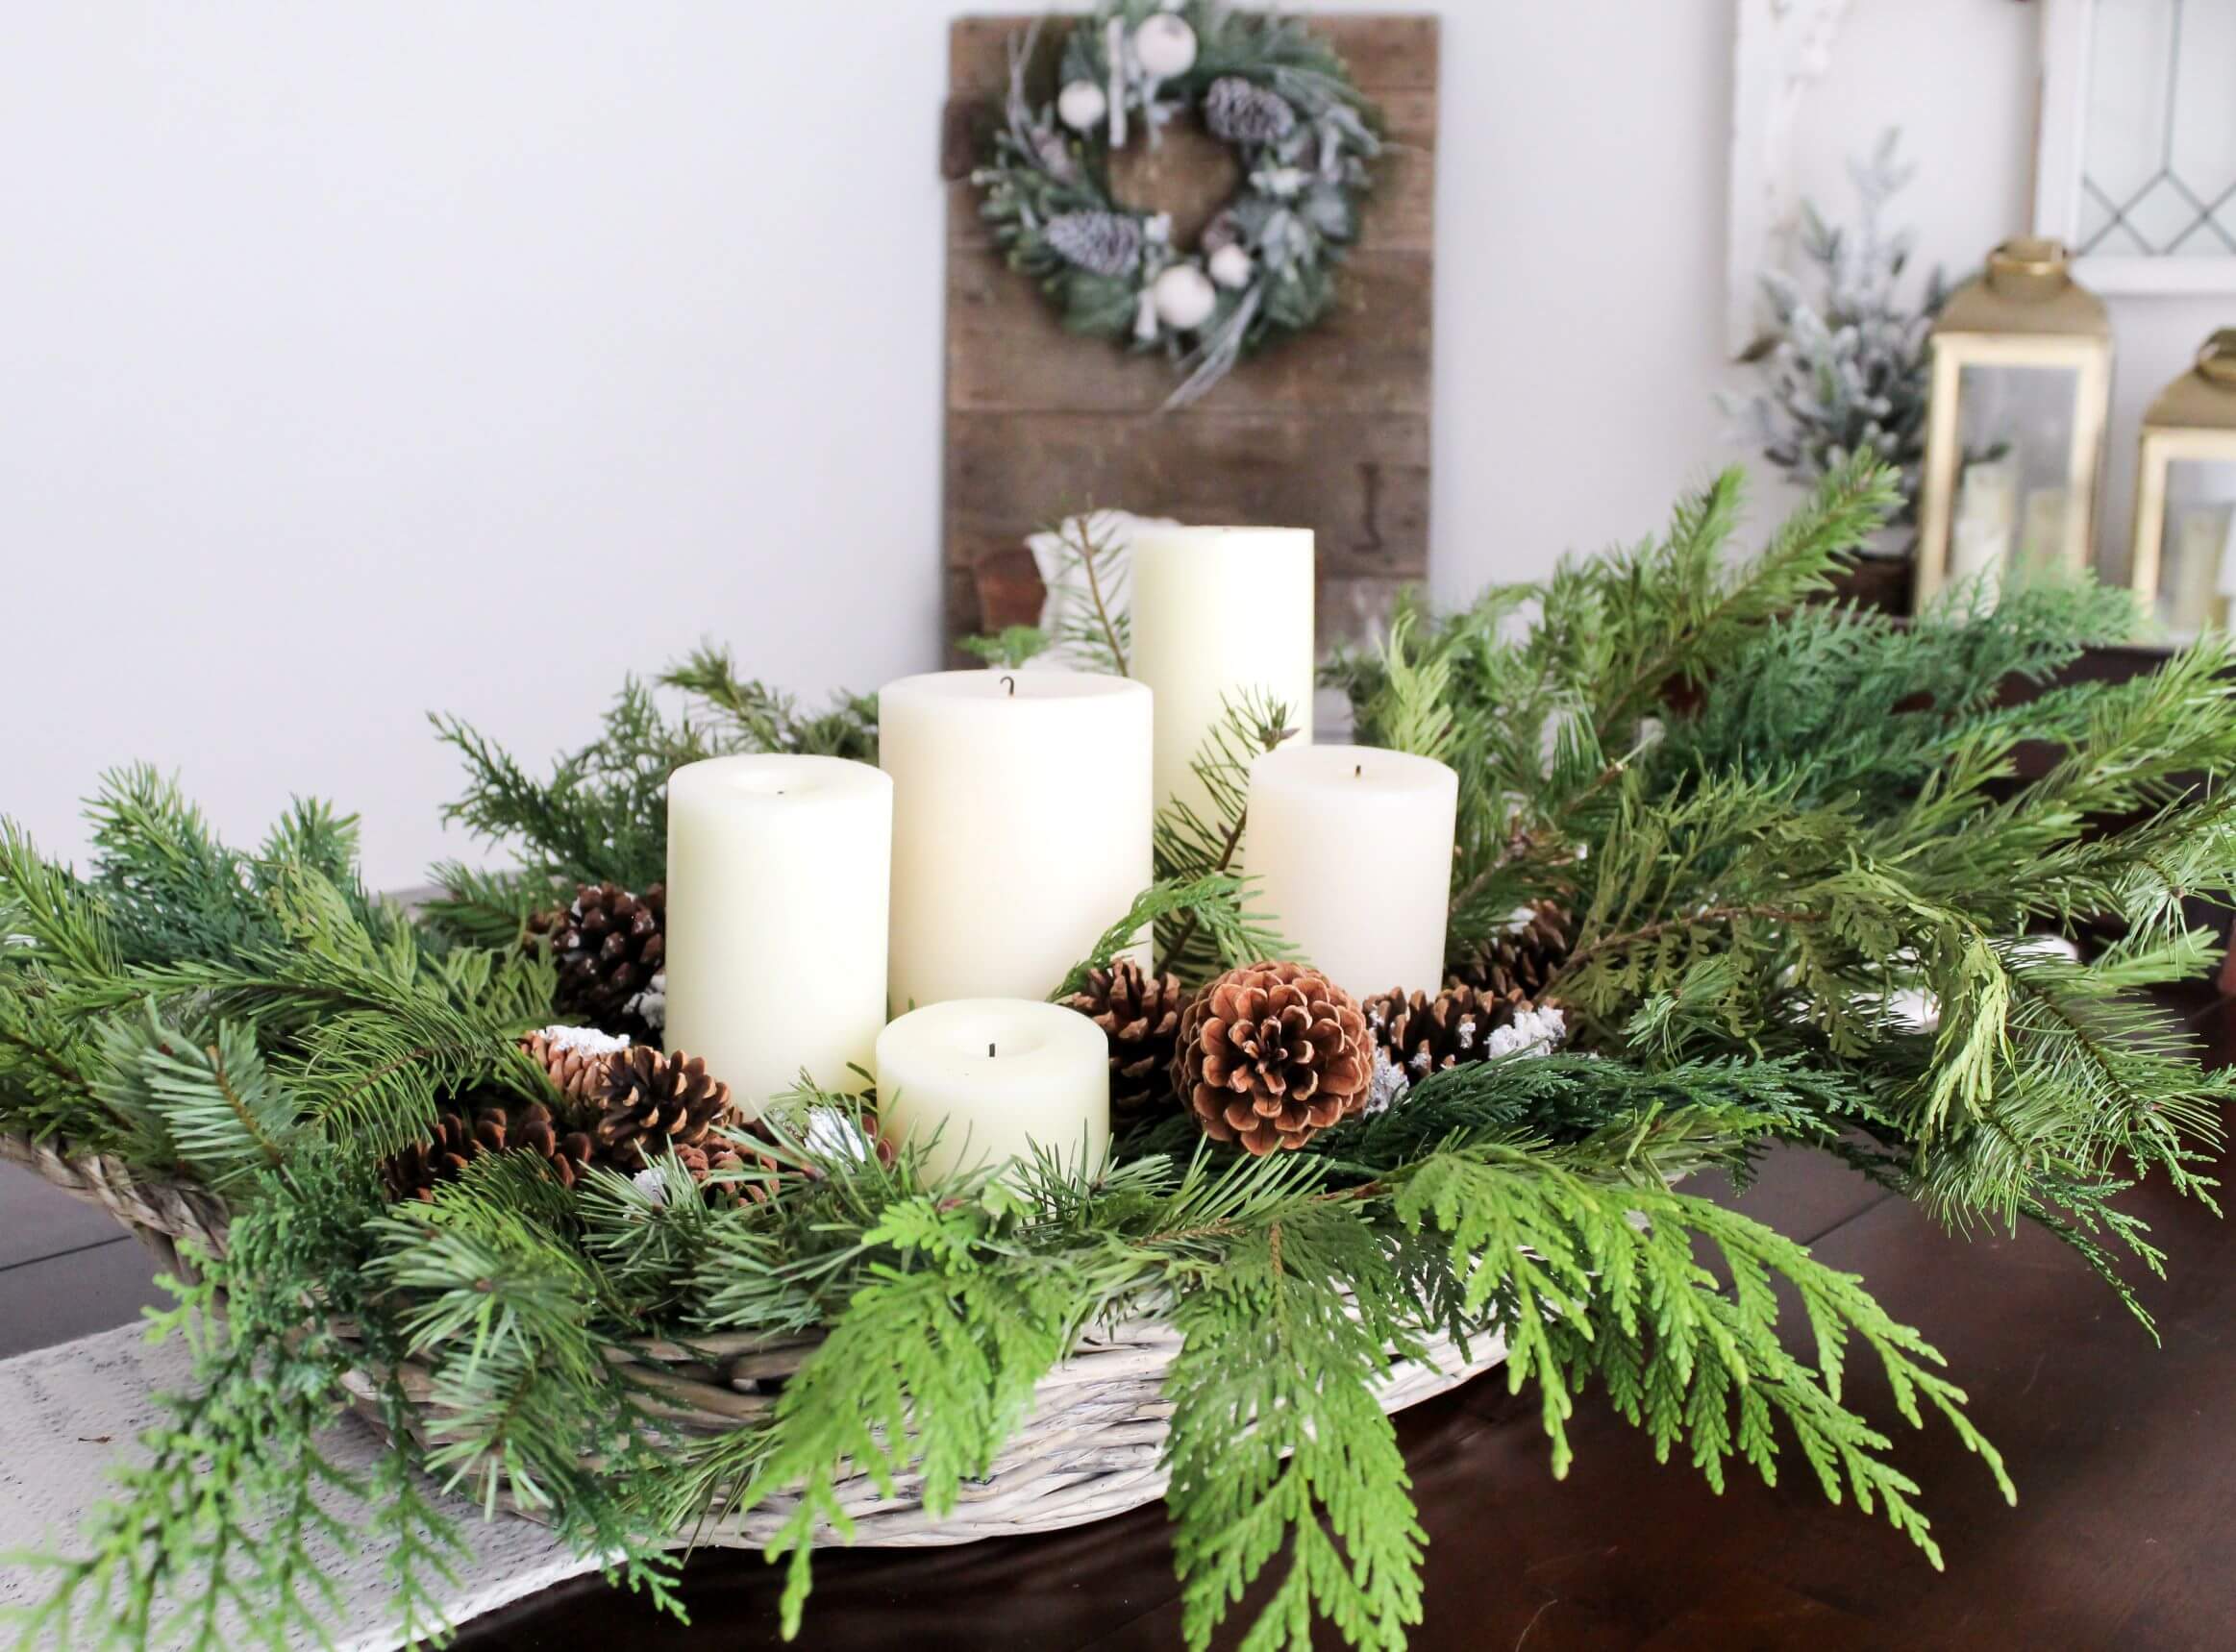 DIY Centerpiece With Greenery And Pinecones - Midwest Life and Style Blog